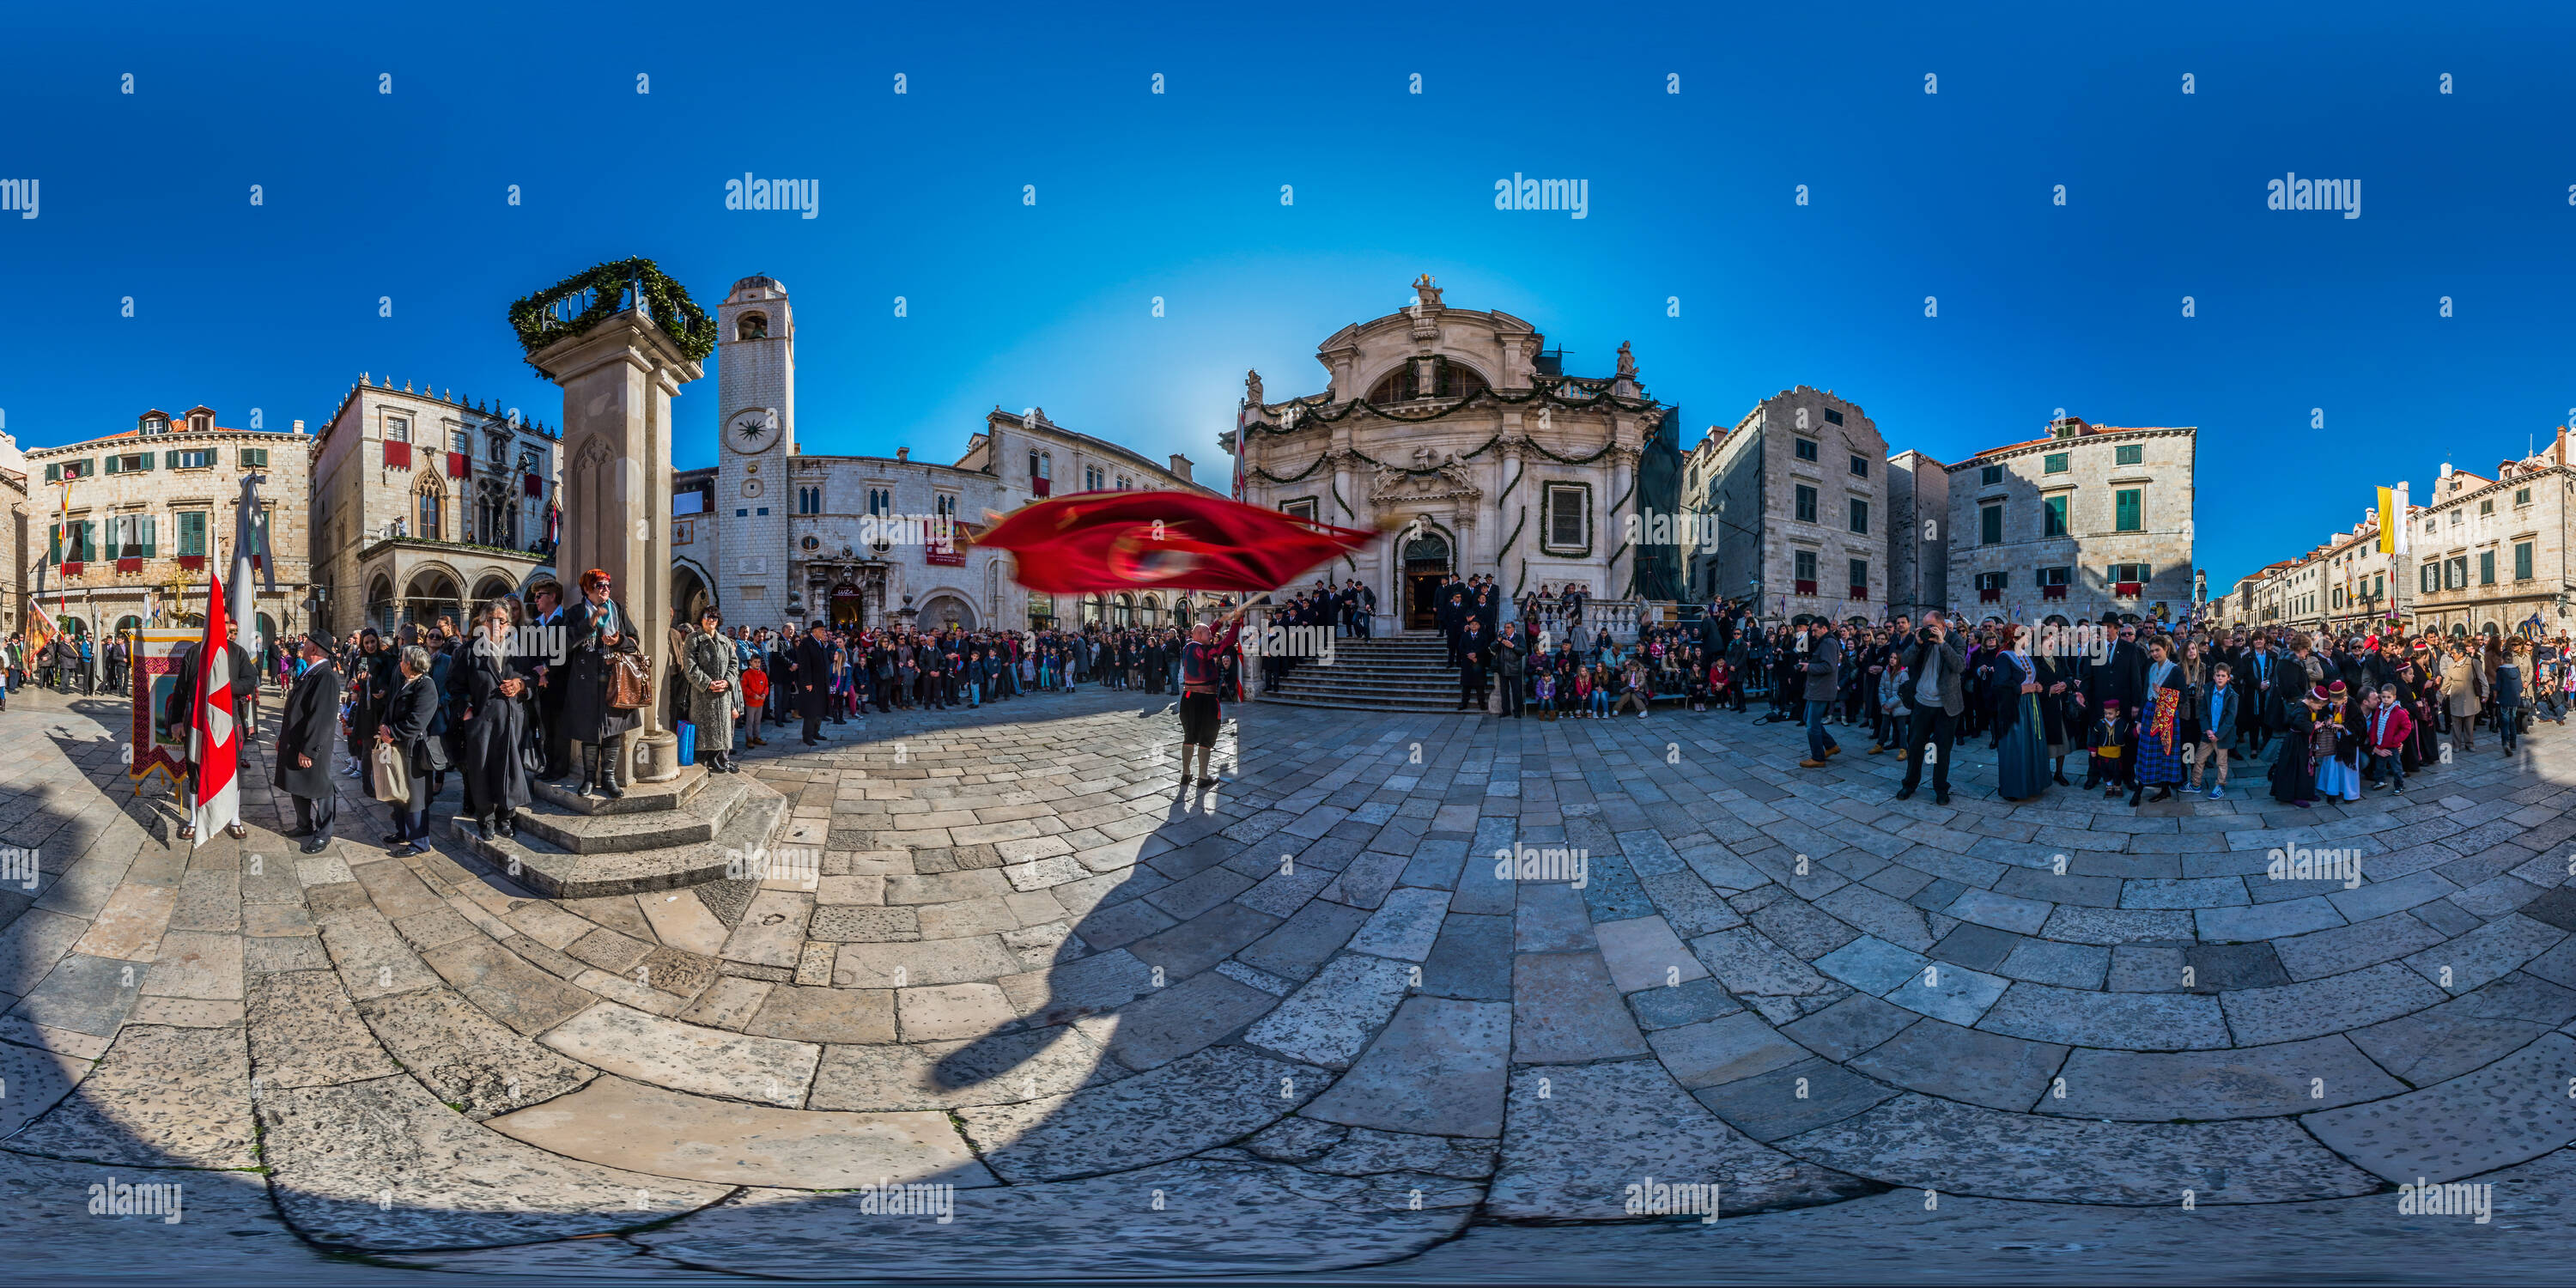 360 degree panoramic view of Feast Day of St. Blaise 2014.